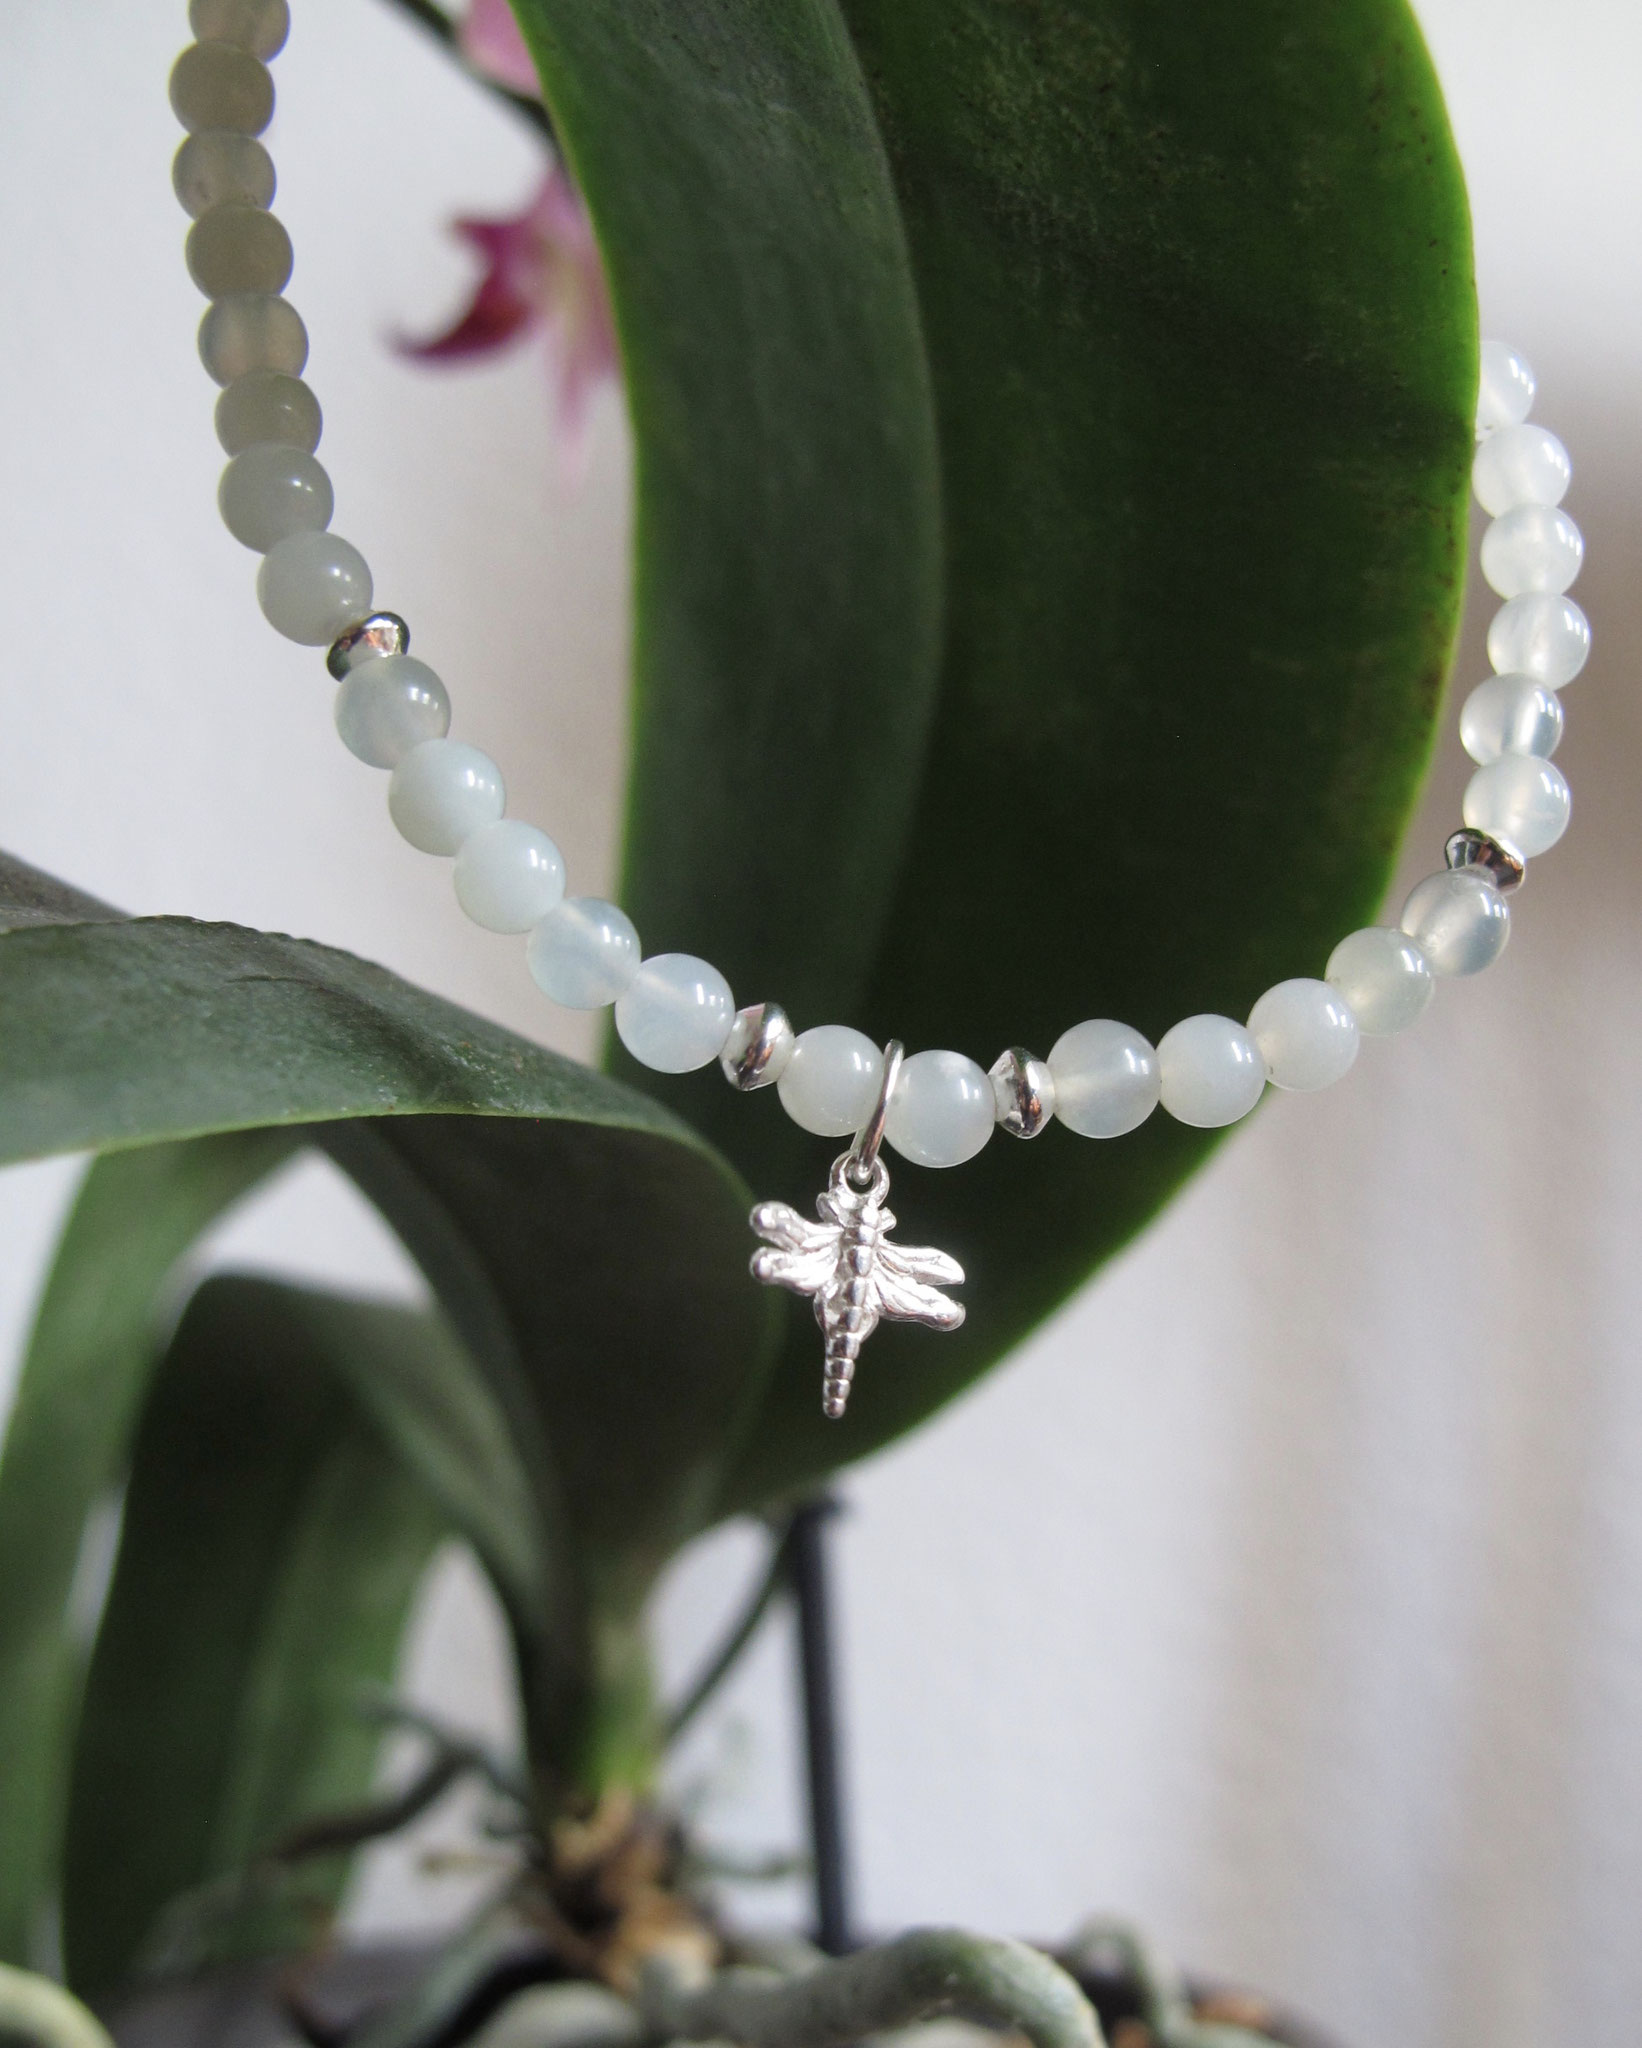 Chinese Jade with 925 Sterling silver elements and dragonfly charm (sold)